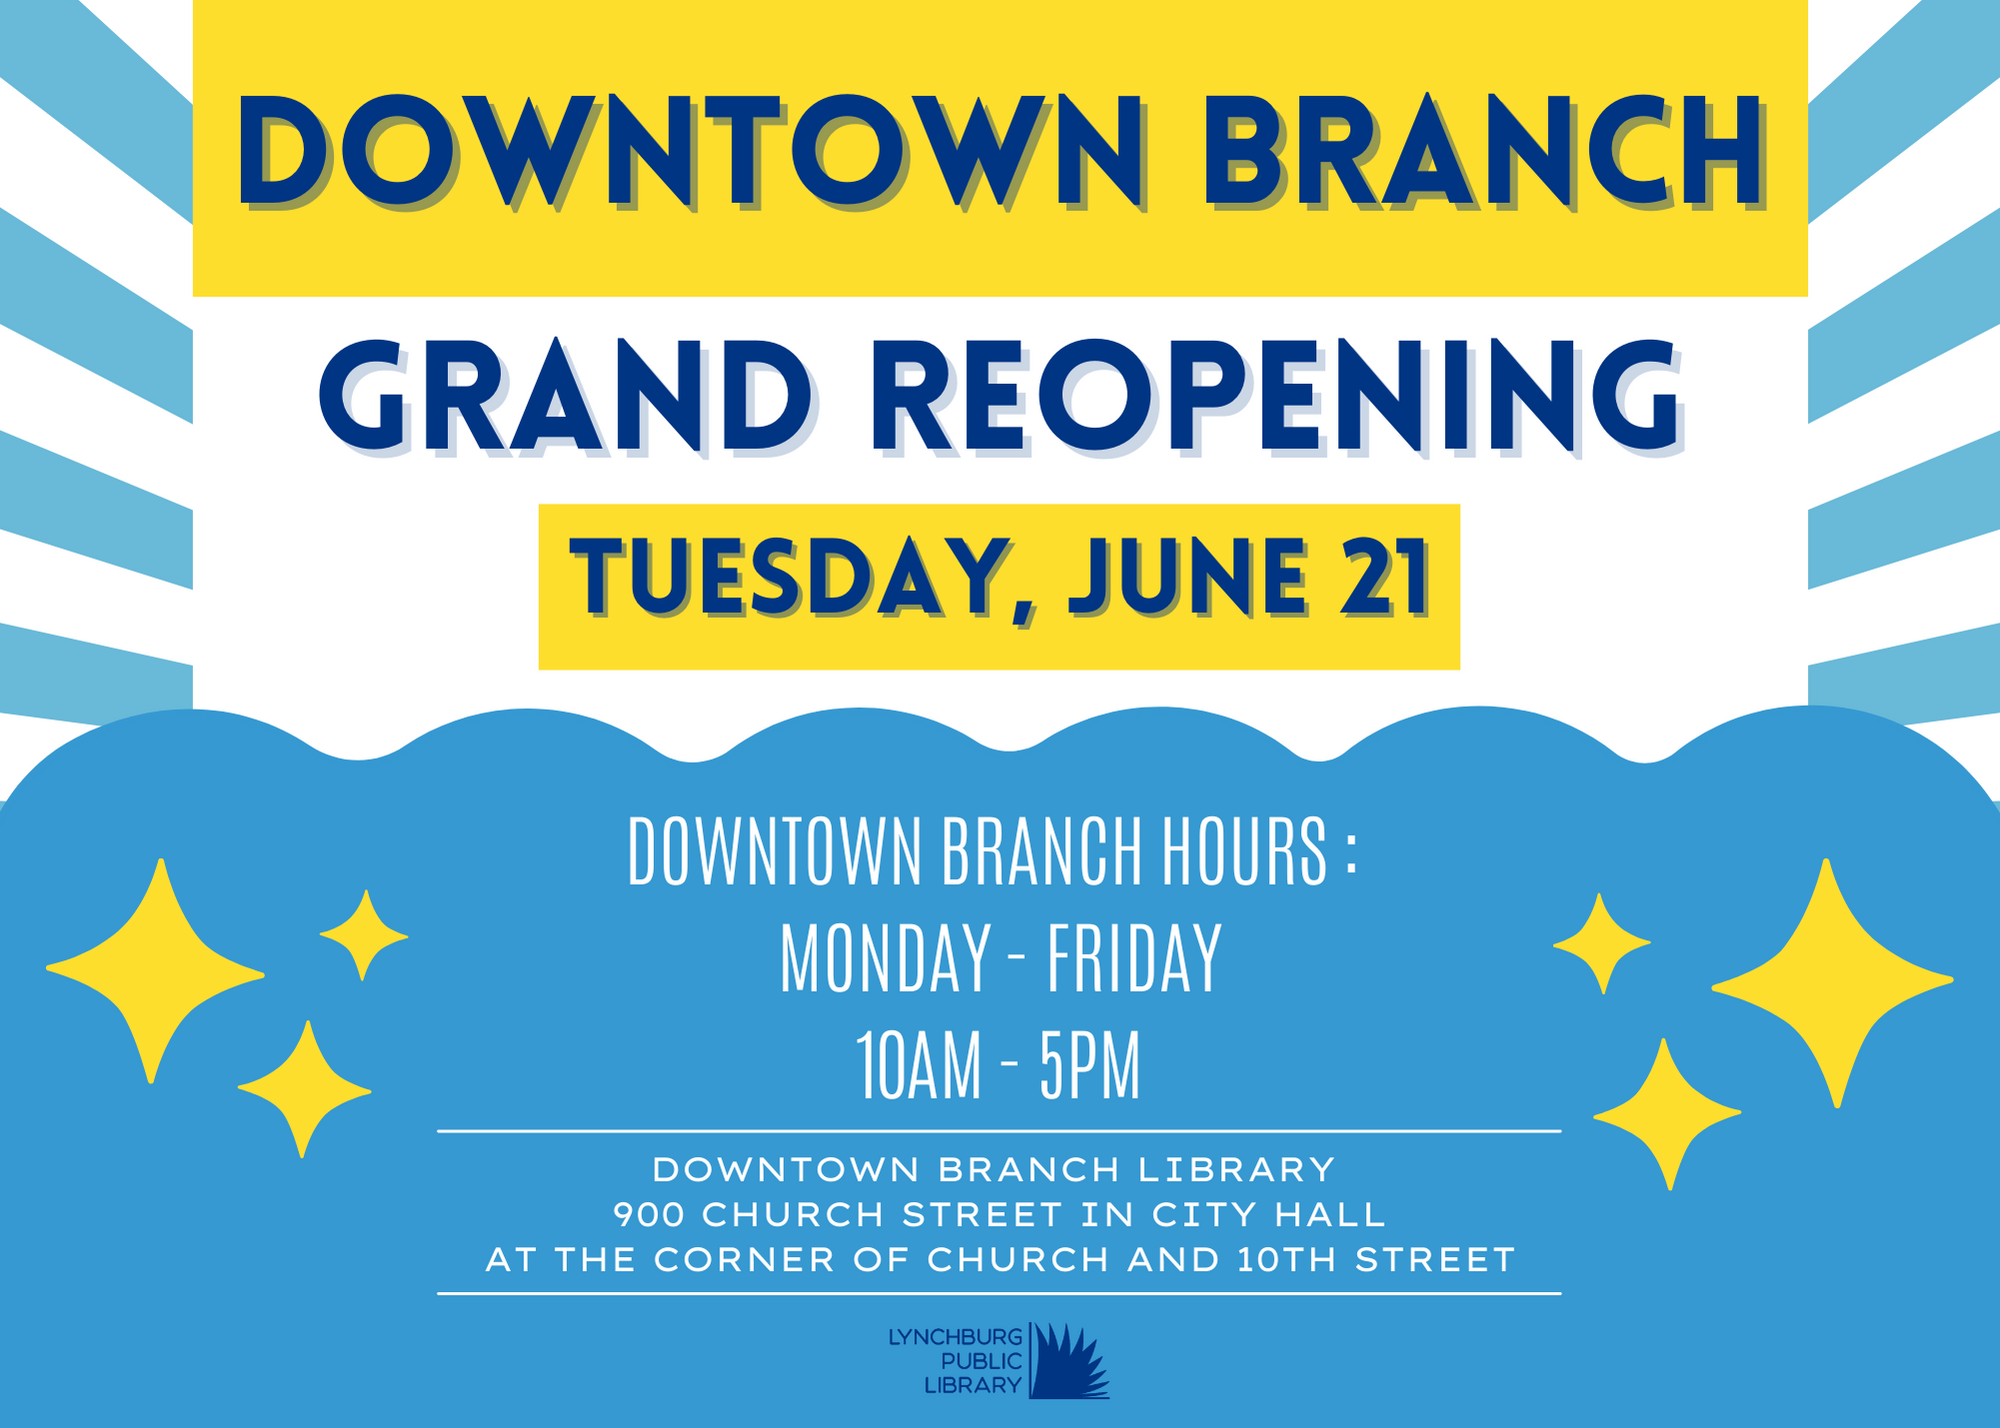 Downtown Branch Grand Reopening on Tuesday, June 21. The Downtown Branch will be open Monday through Friday 10 am to 5 pm.